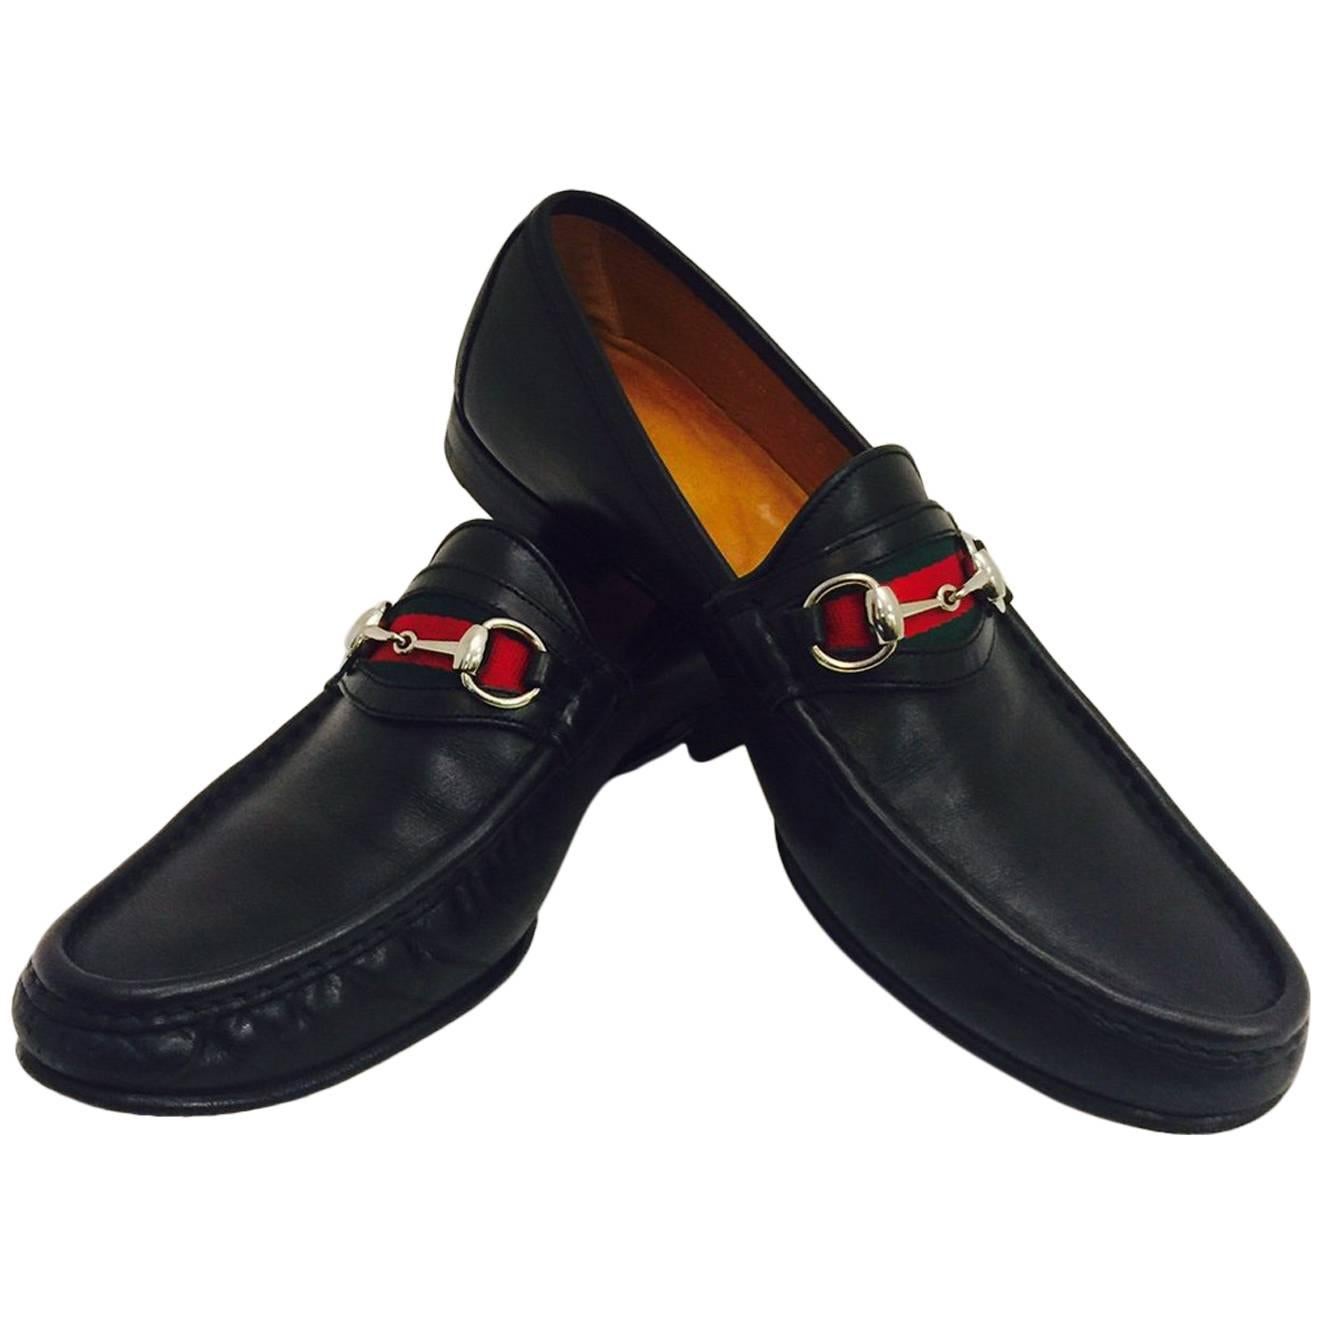 Men's Gucci Penny Loafers with Iconic Ribbon Stripe & Horsebit. Sz 9 1/2 Black